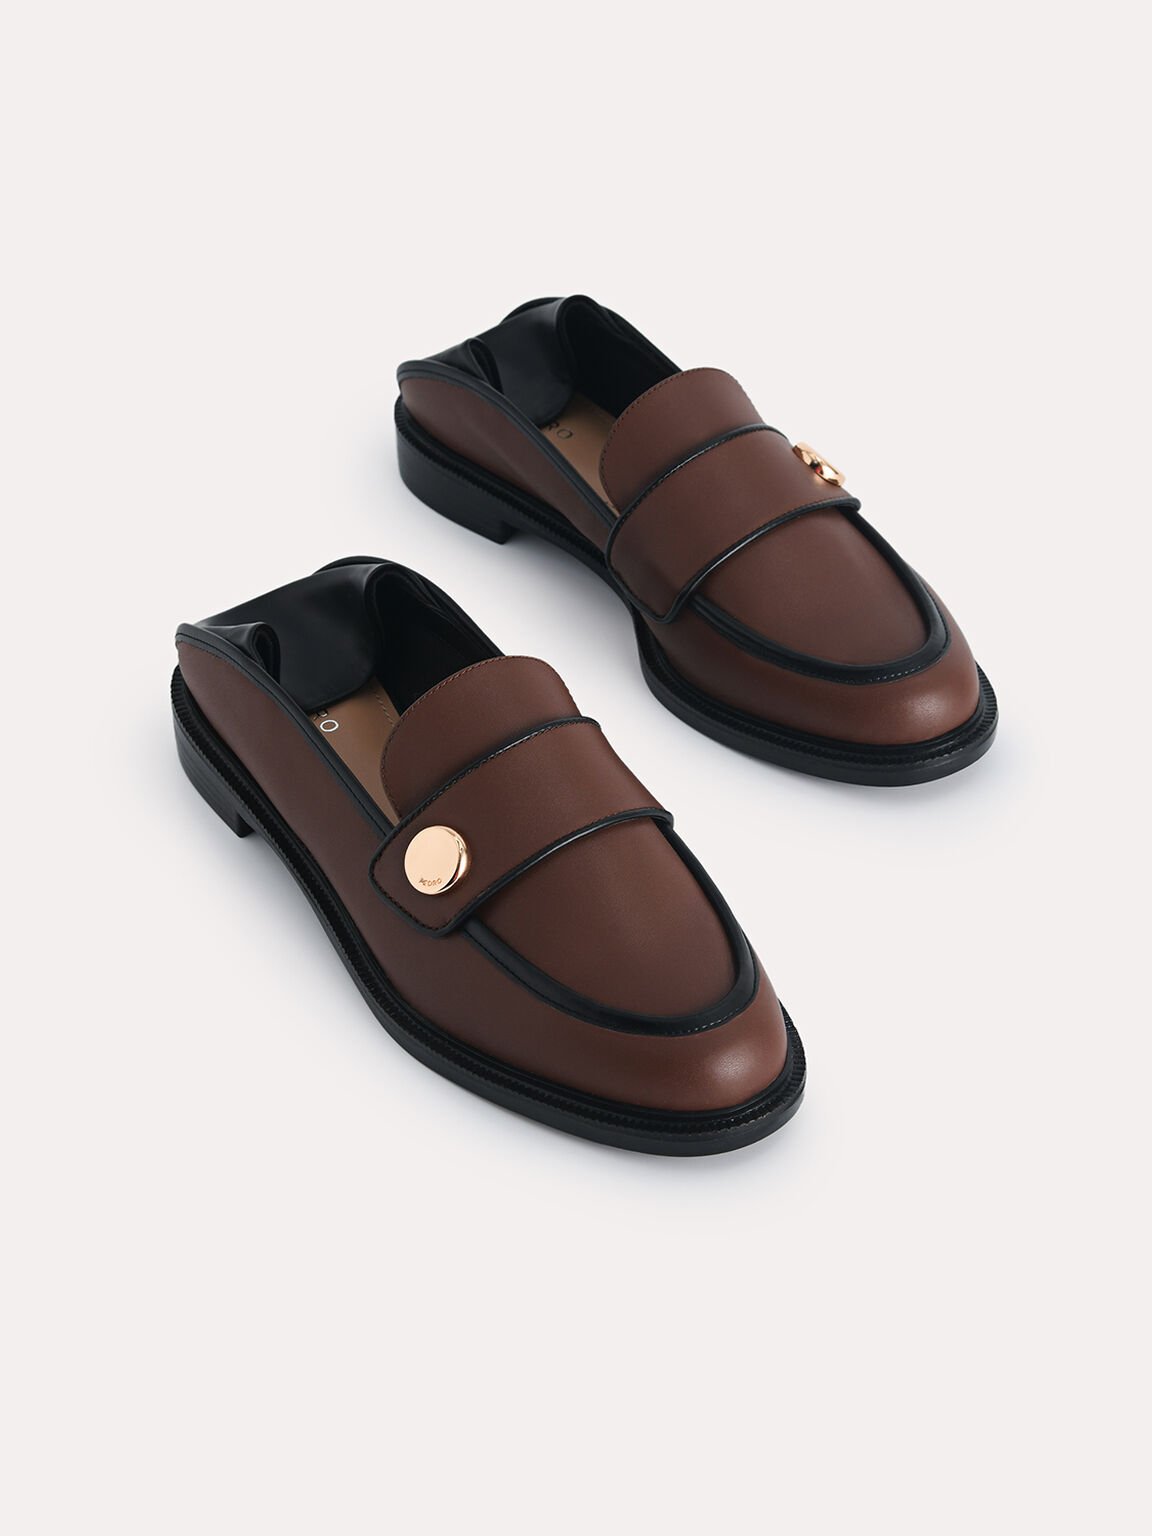 Leather Loafers, Dark Brown, hi-res